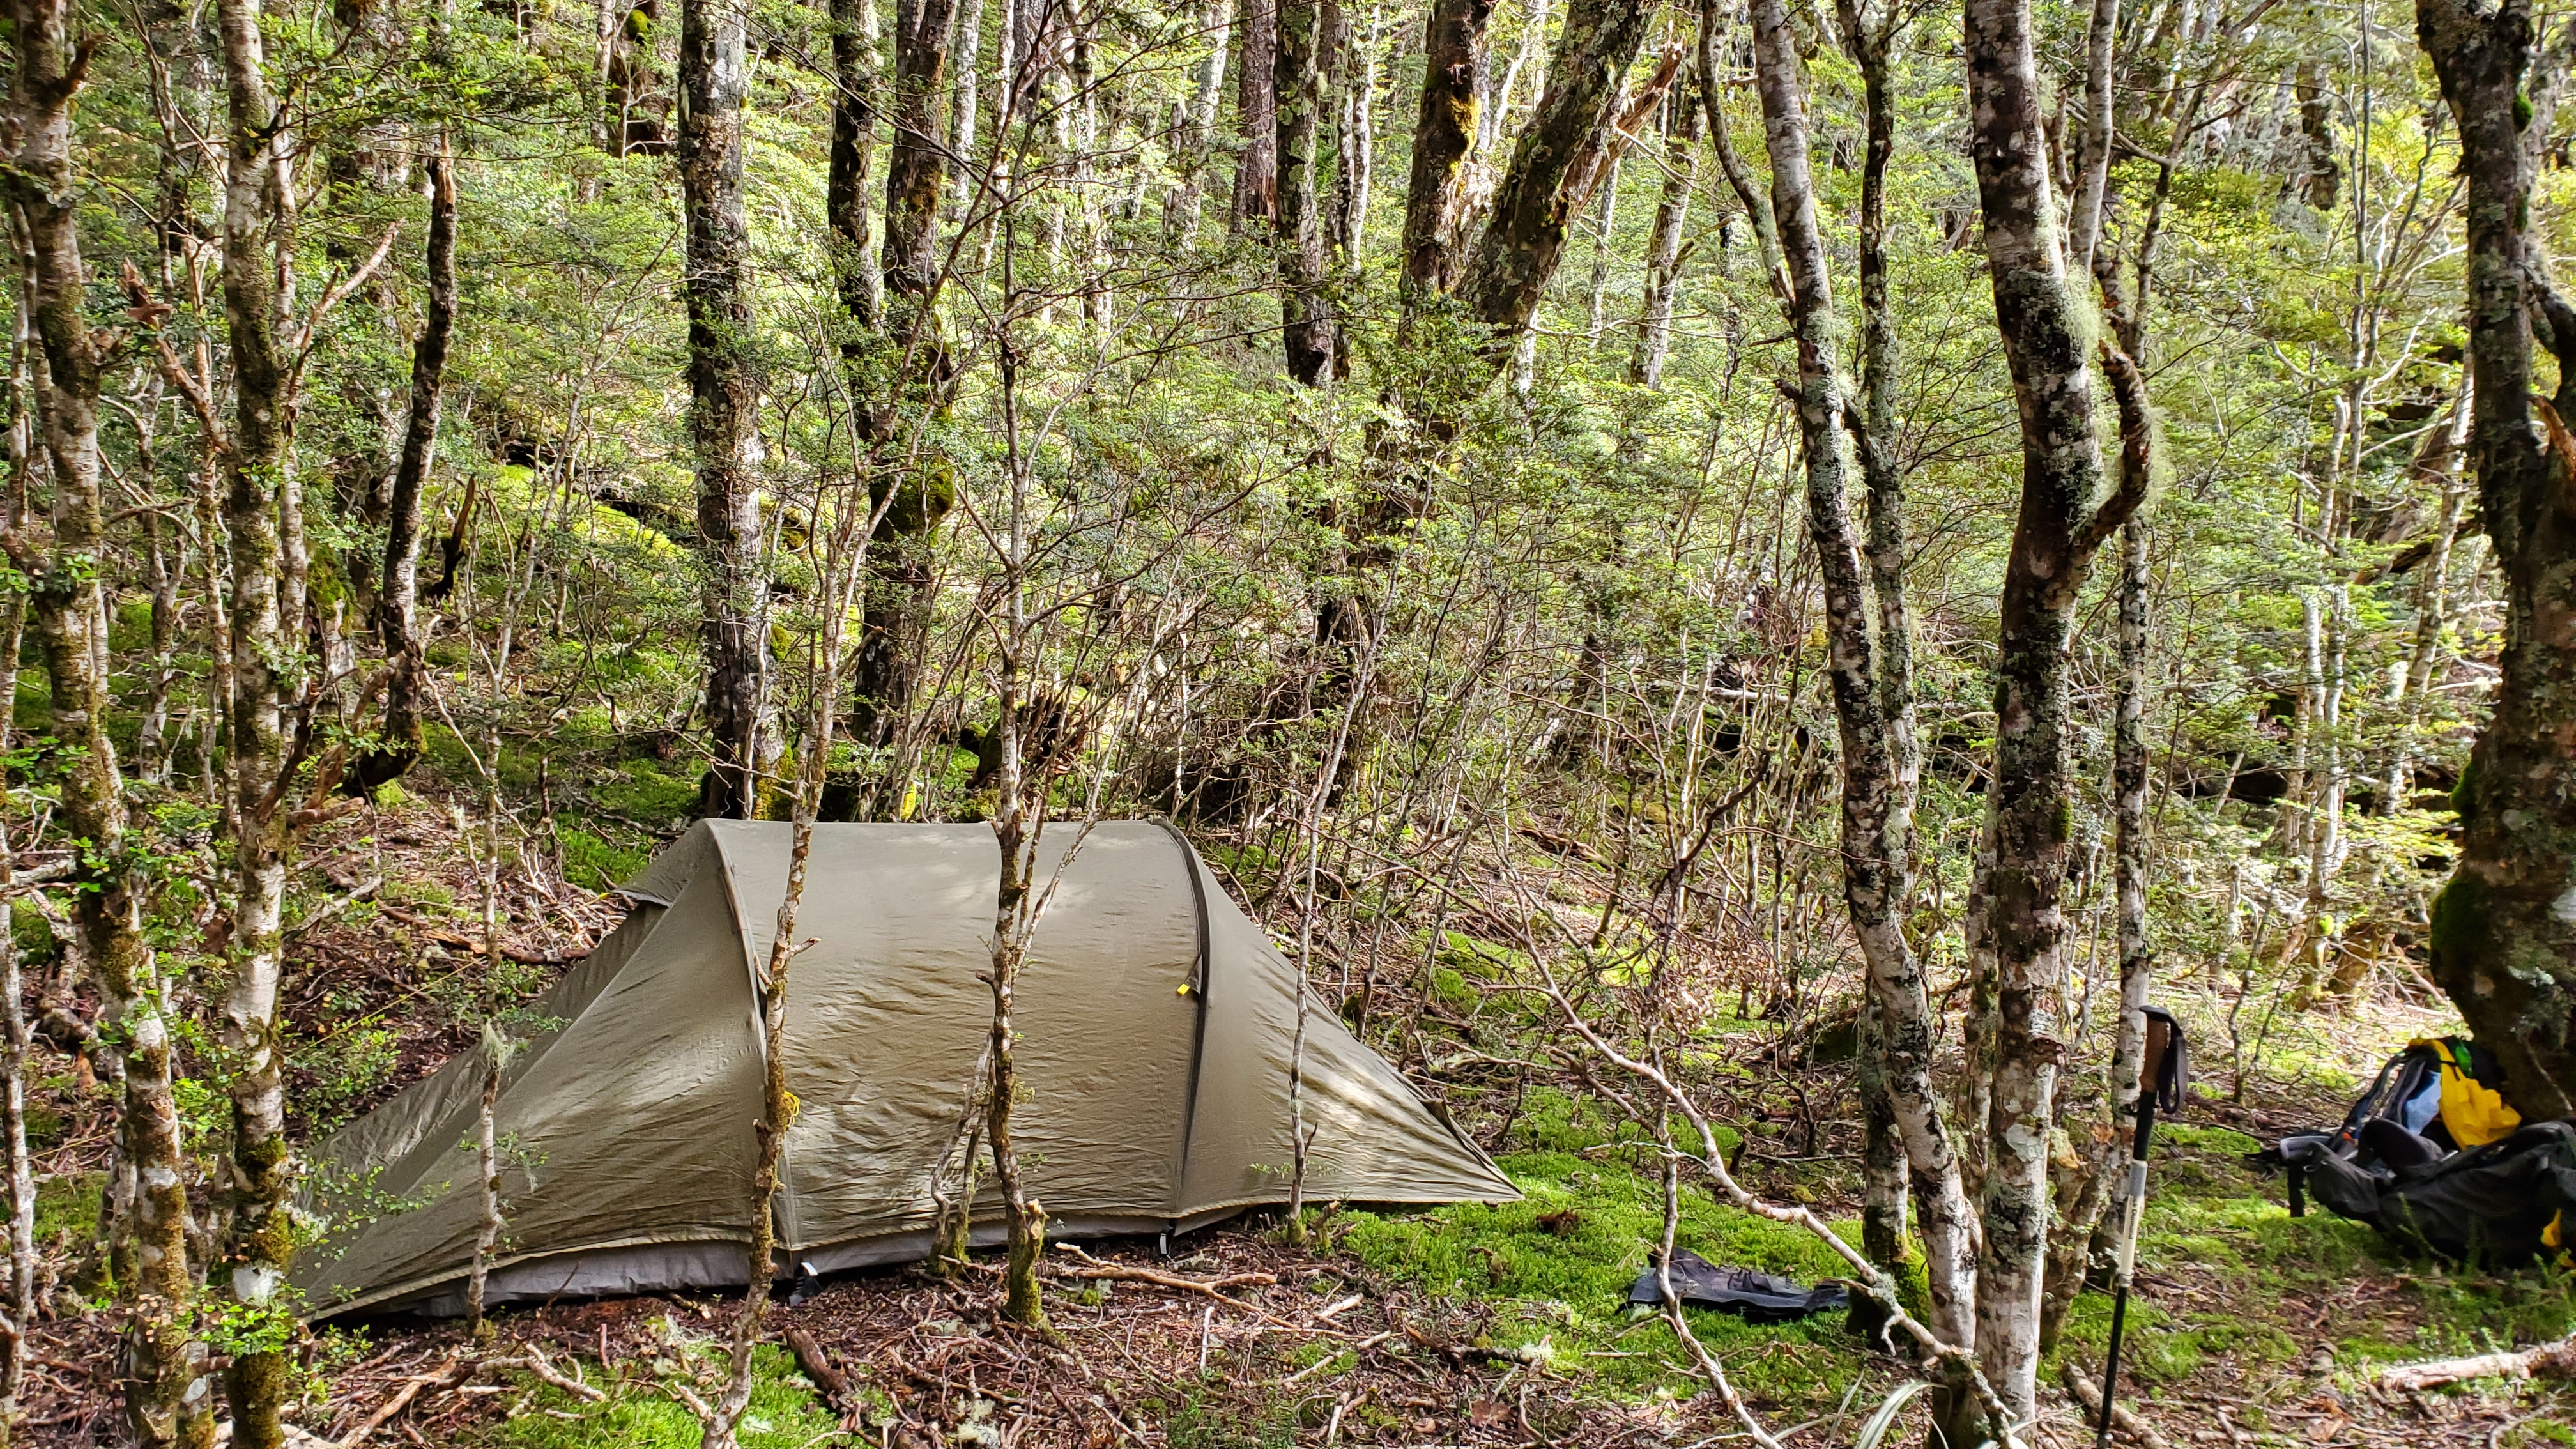 Camping in the forest above Ranger biv